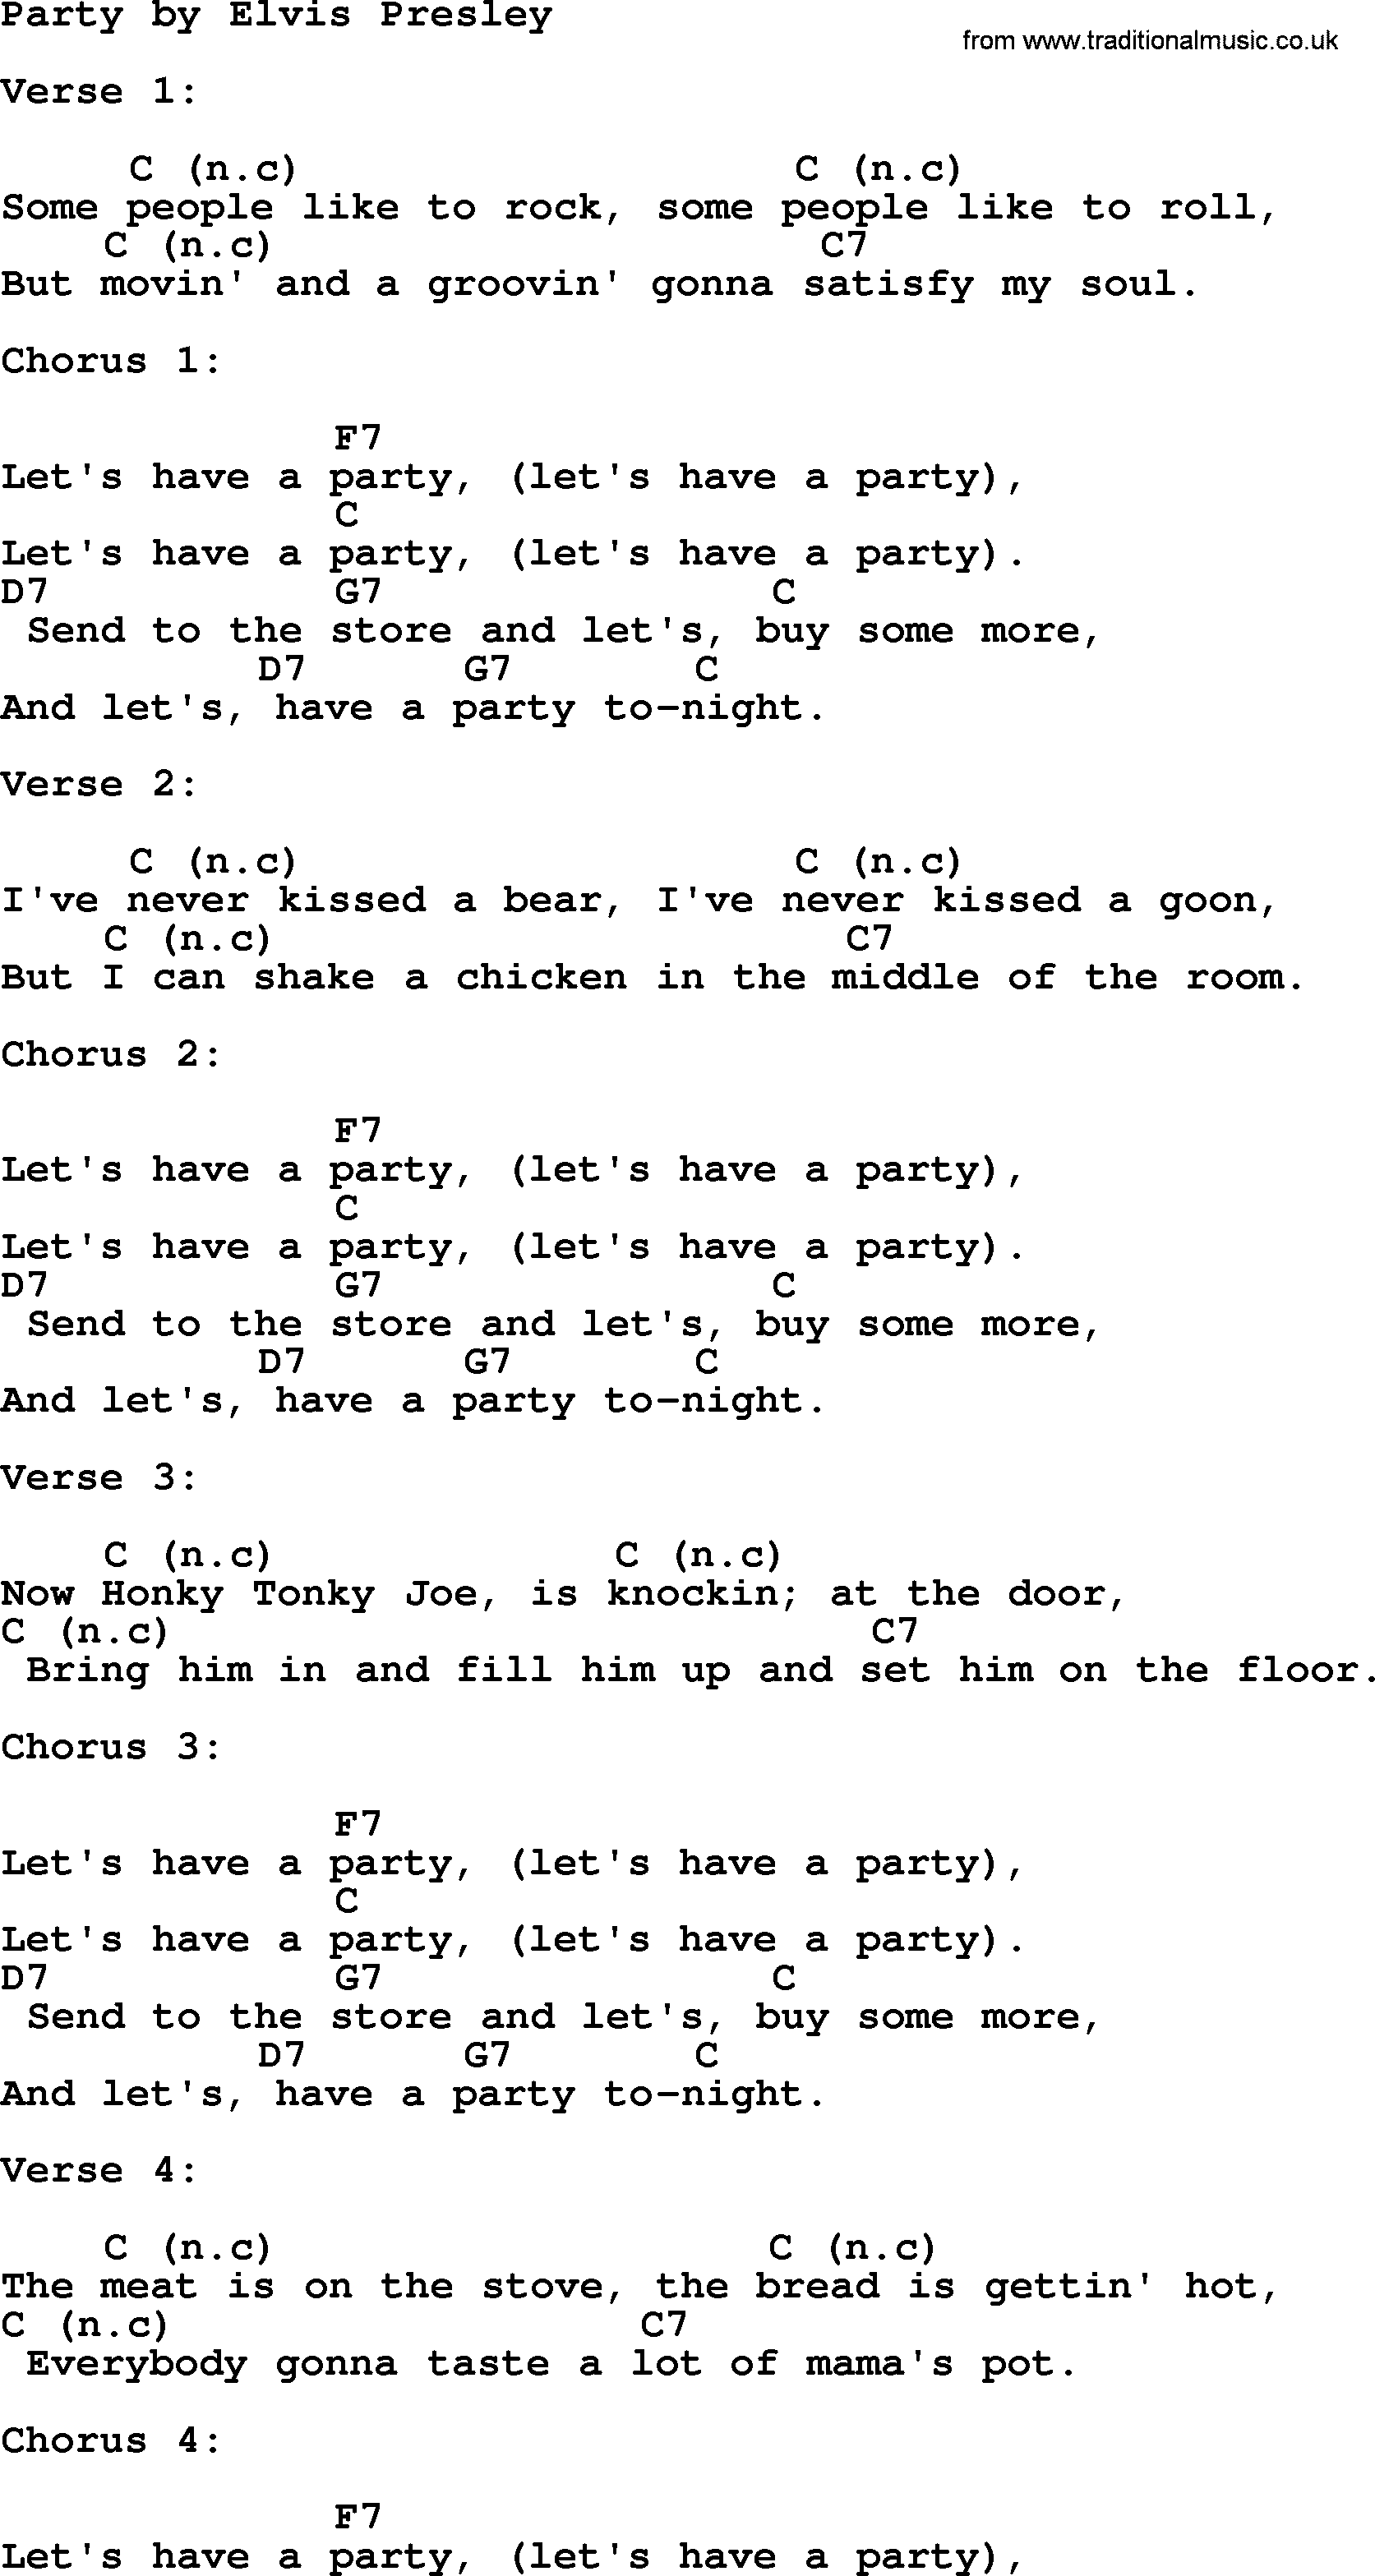 Elvis Presley song: Party, lyrics and chords